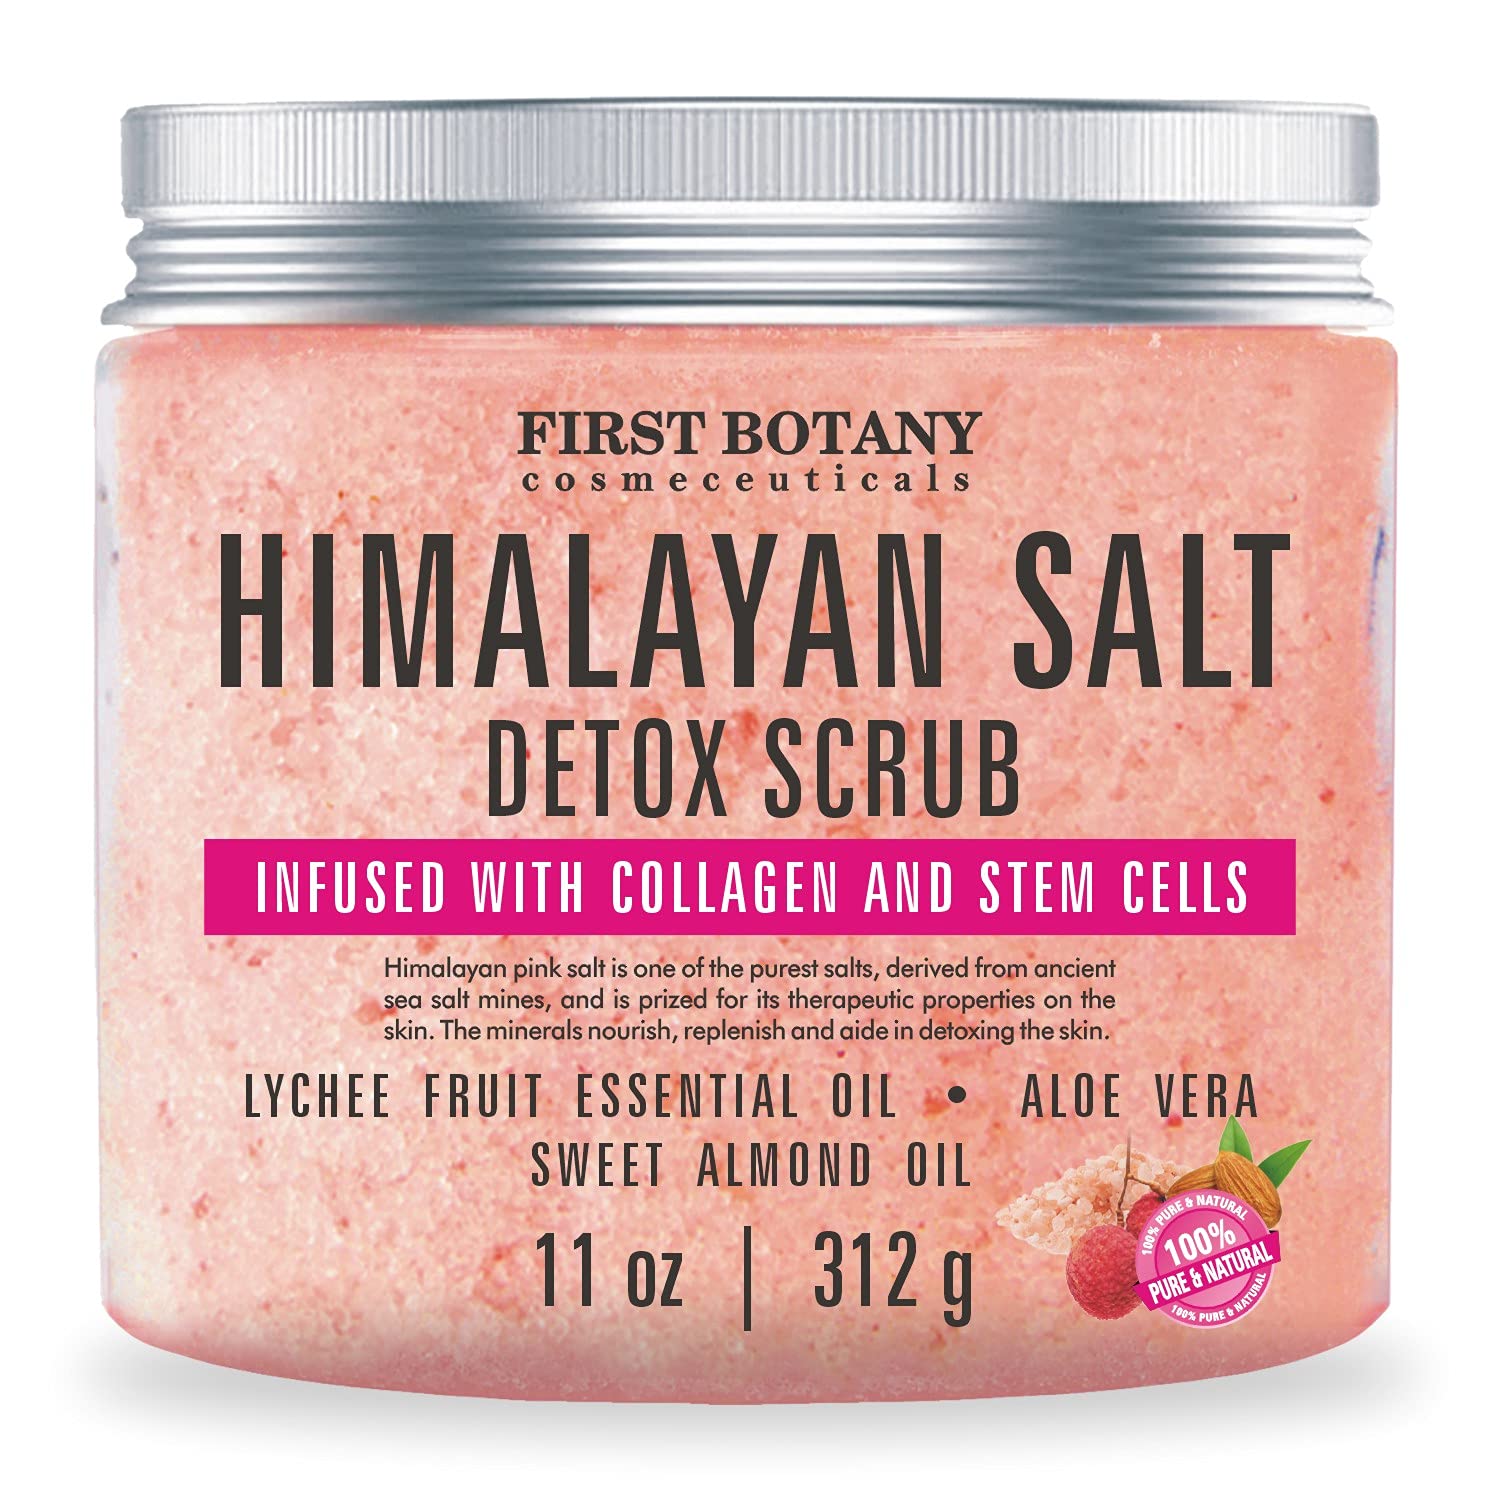 Himalayan Salt Body Scrub with Collagen and Stem Cells [...]